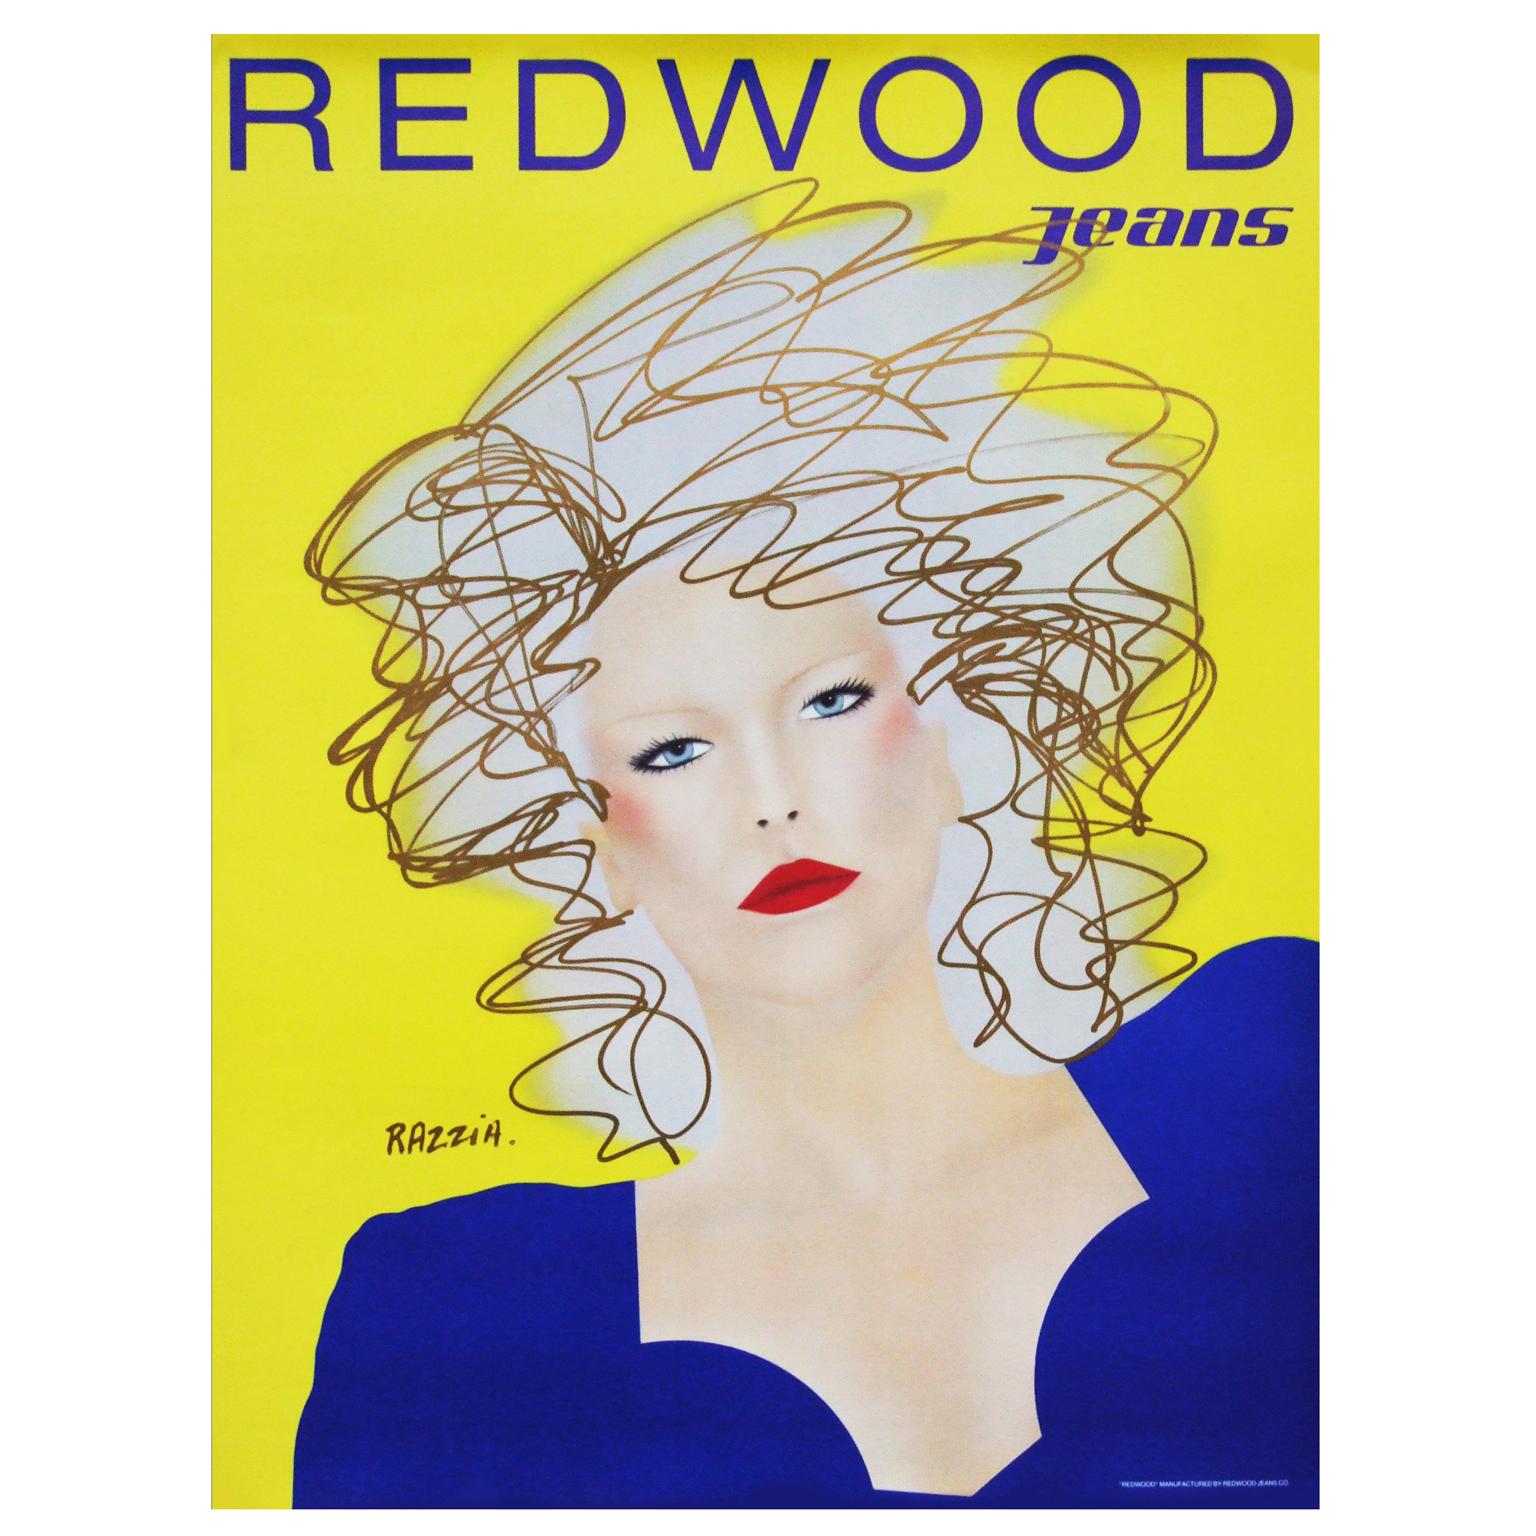 Original 1980s promotional poster for Redwood Jeans designed by Razzia, 1982.

First edition color offset lithograph.

Rolled.

Measures: L 83.5cm x W 63cm.